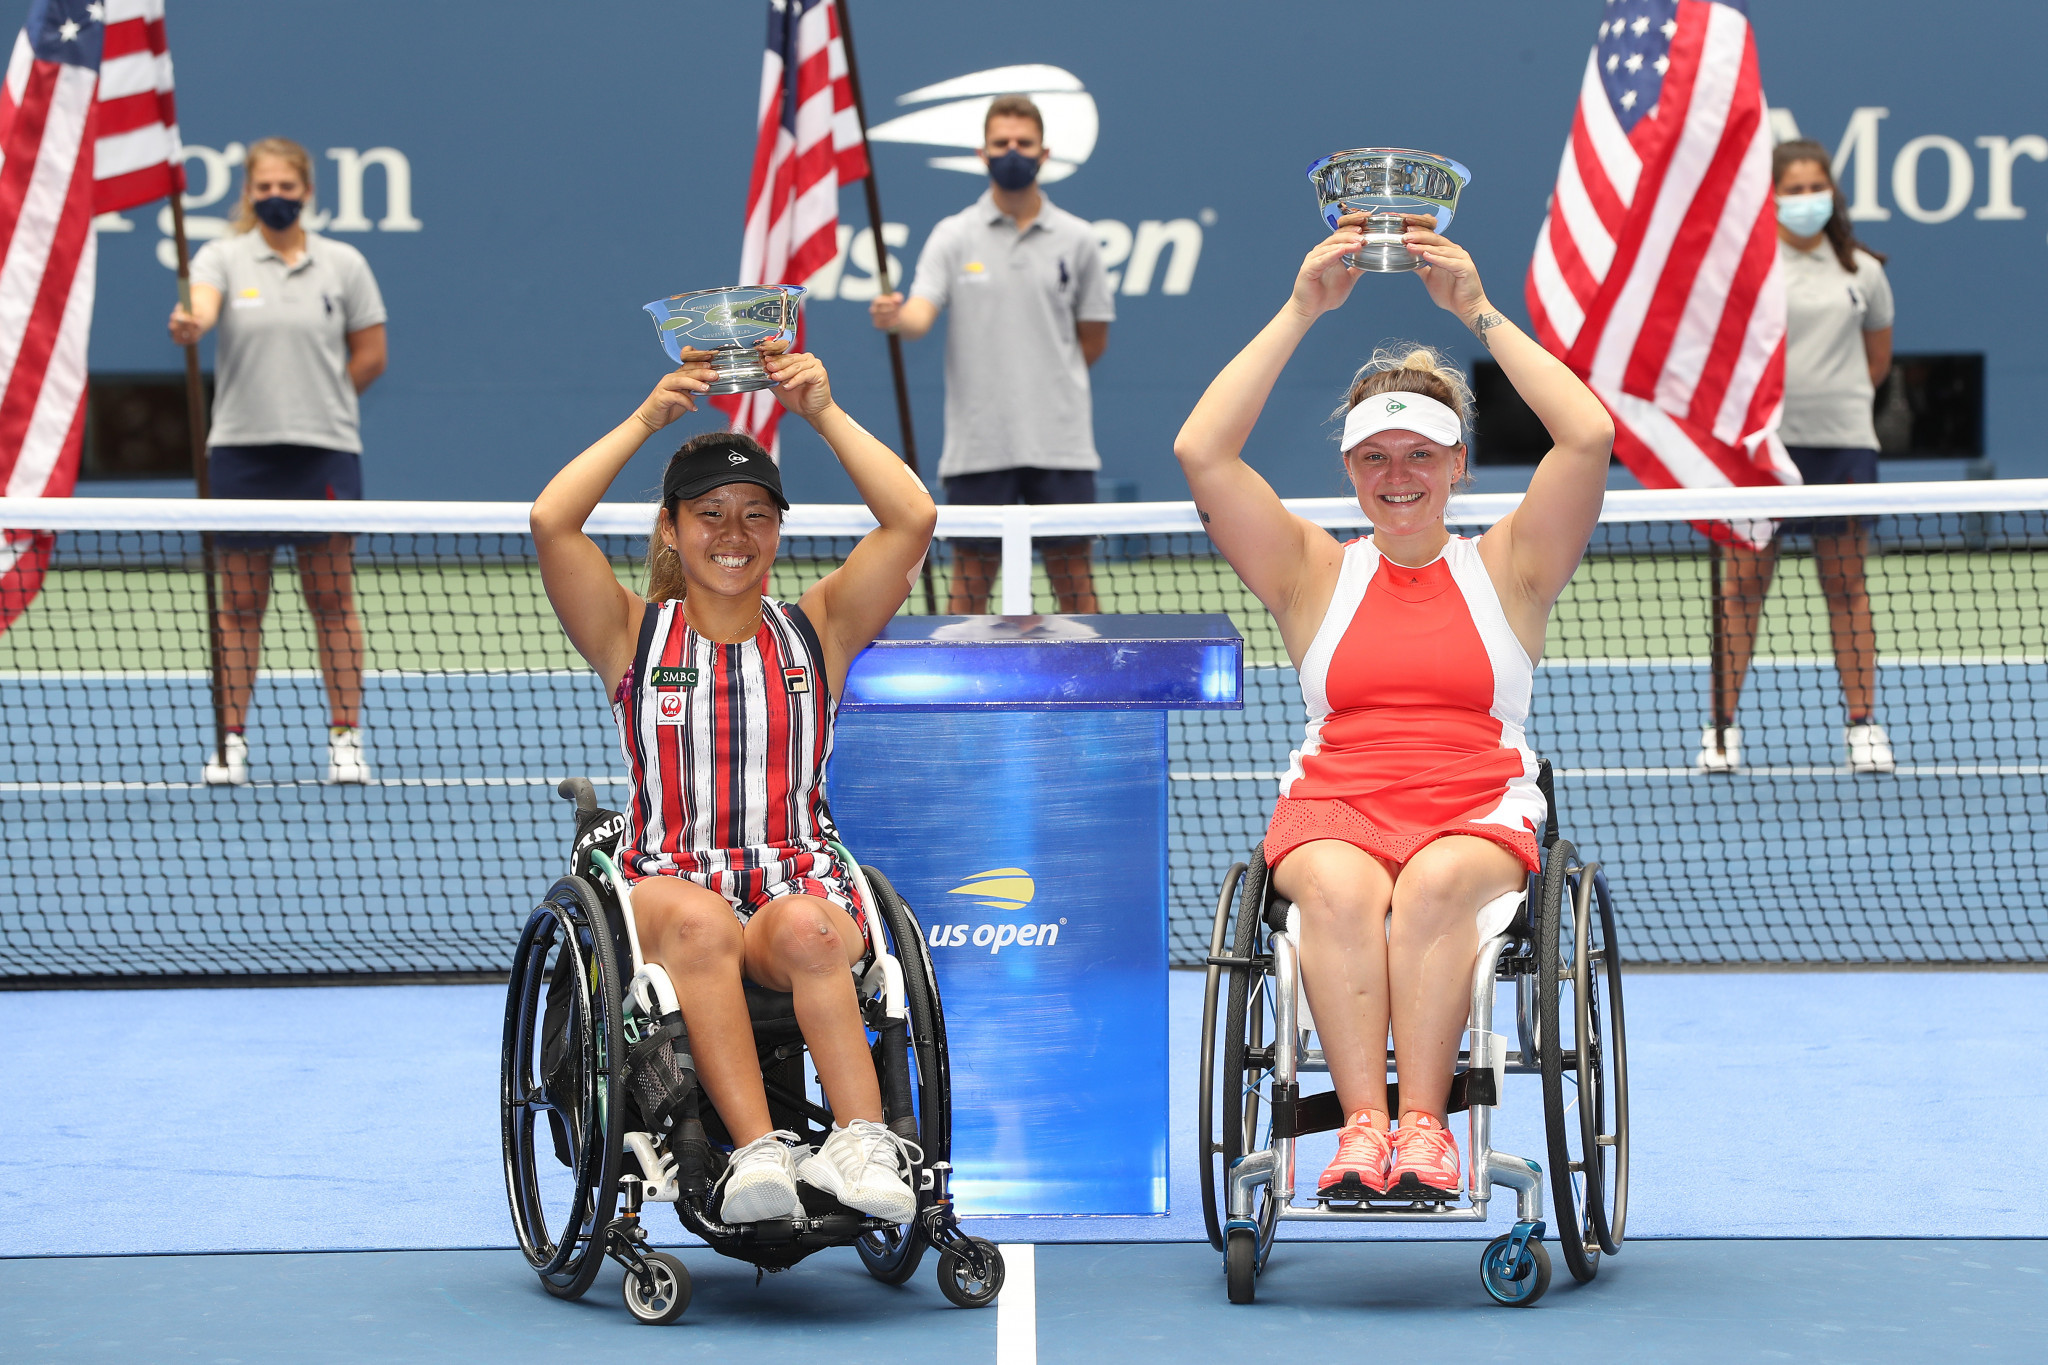 Yui Kamiji and Jordanne Whiley won in straight sets to win the women's wheelchair doubles over top seeds and Dutch pair Diede de Groot and Marjolein Buis ©Getty Images